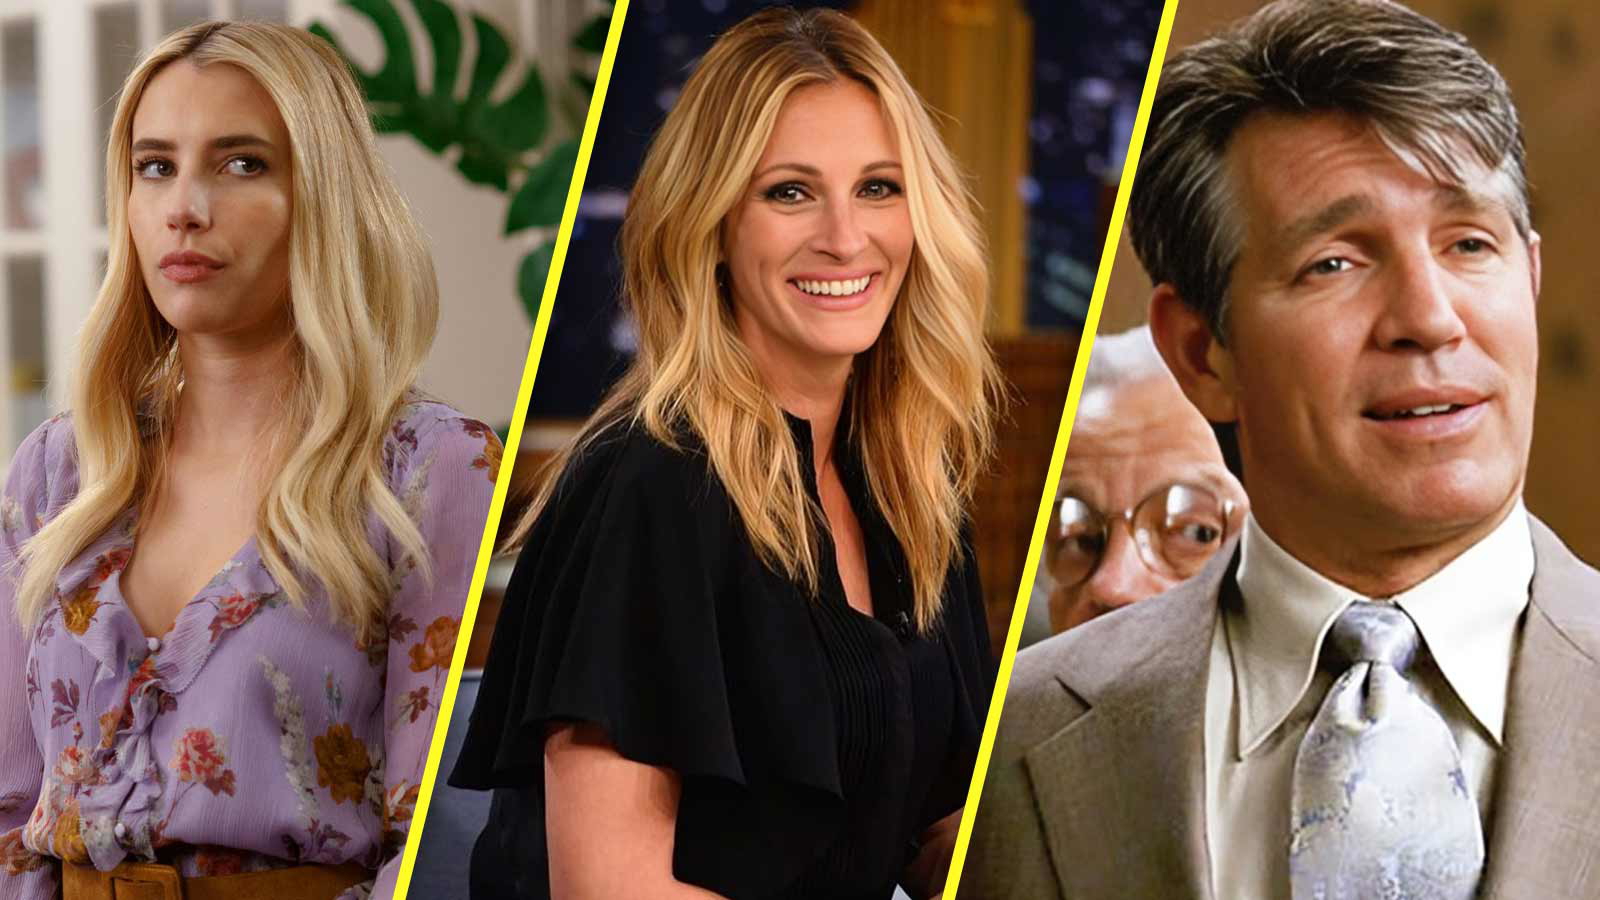 “I’m not supposed to talk about either of them”: Julia Roberts and Emma Roberts Want Eric Roberts to Follow 1 Strict Rule During His Public Appearances